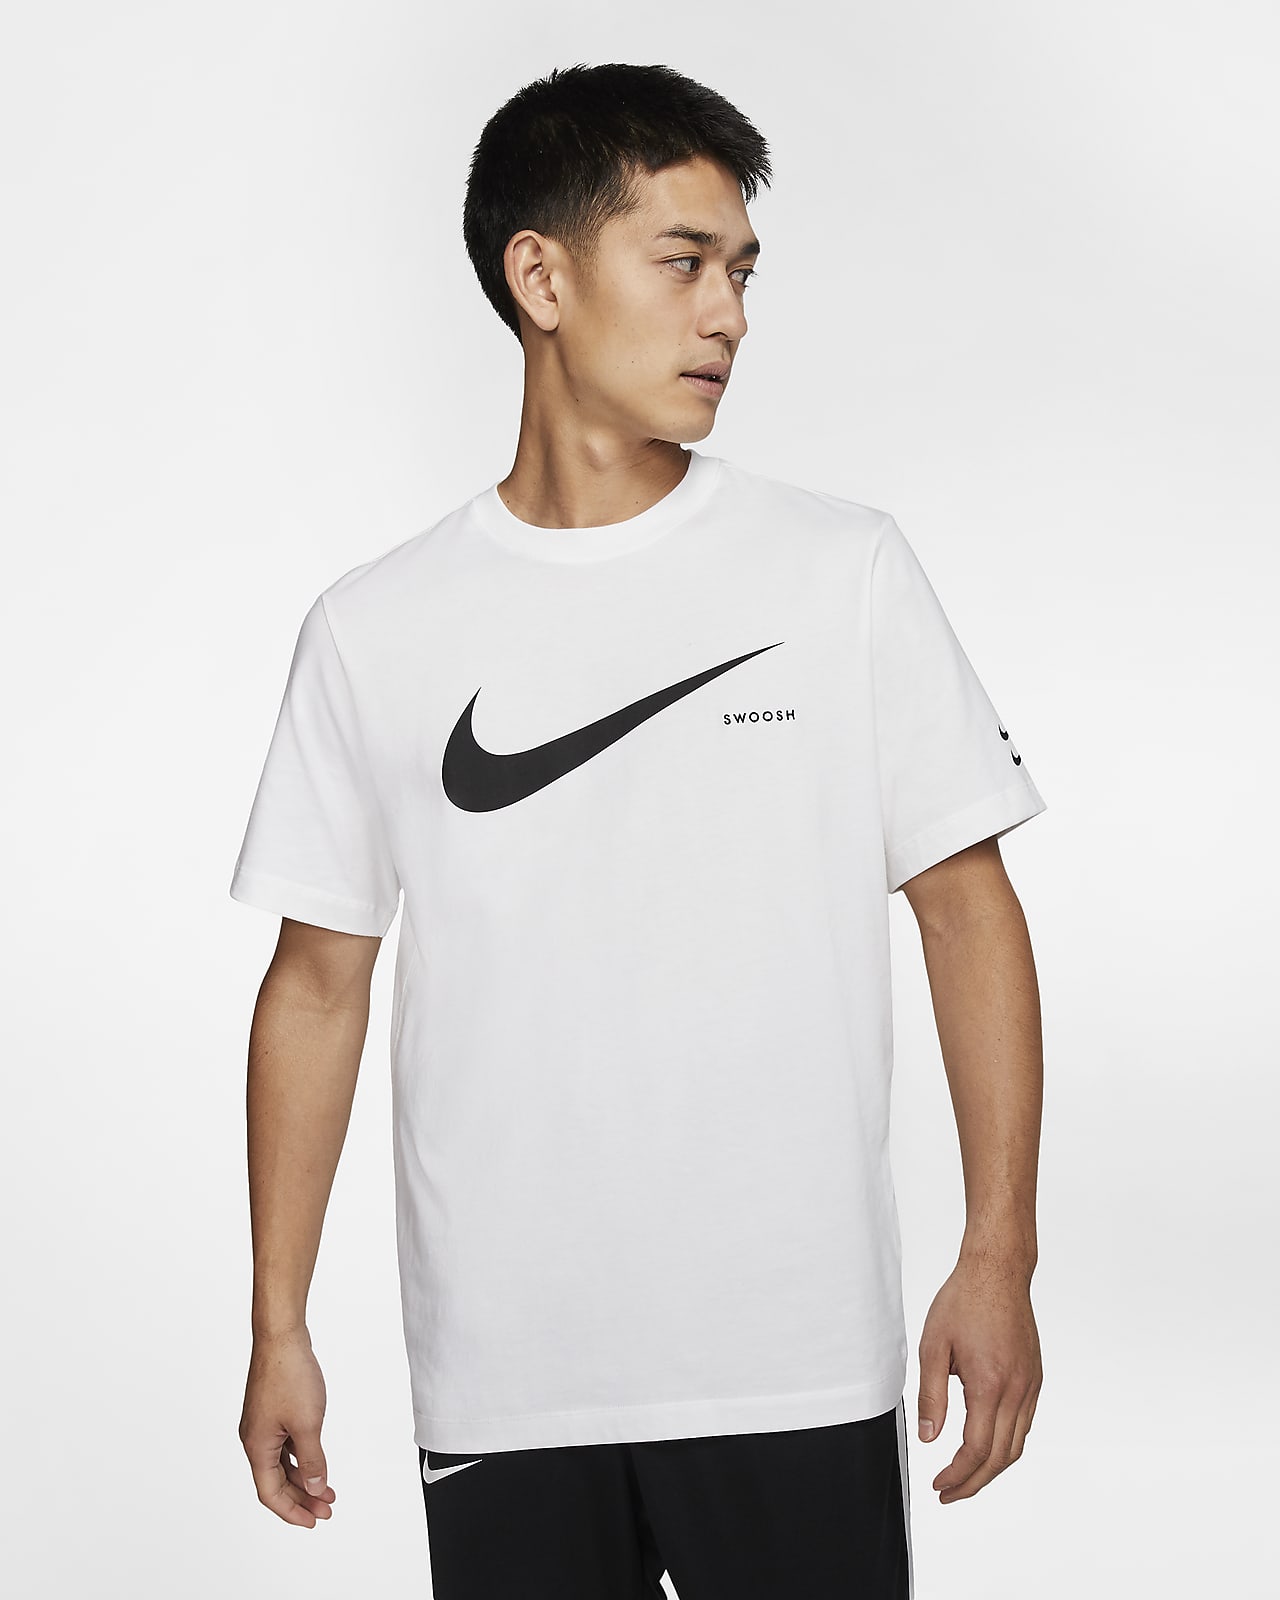 nike t shirt swoosh in middle